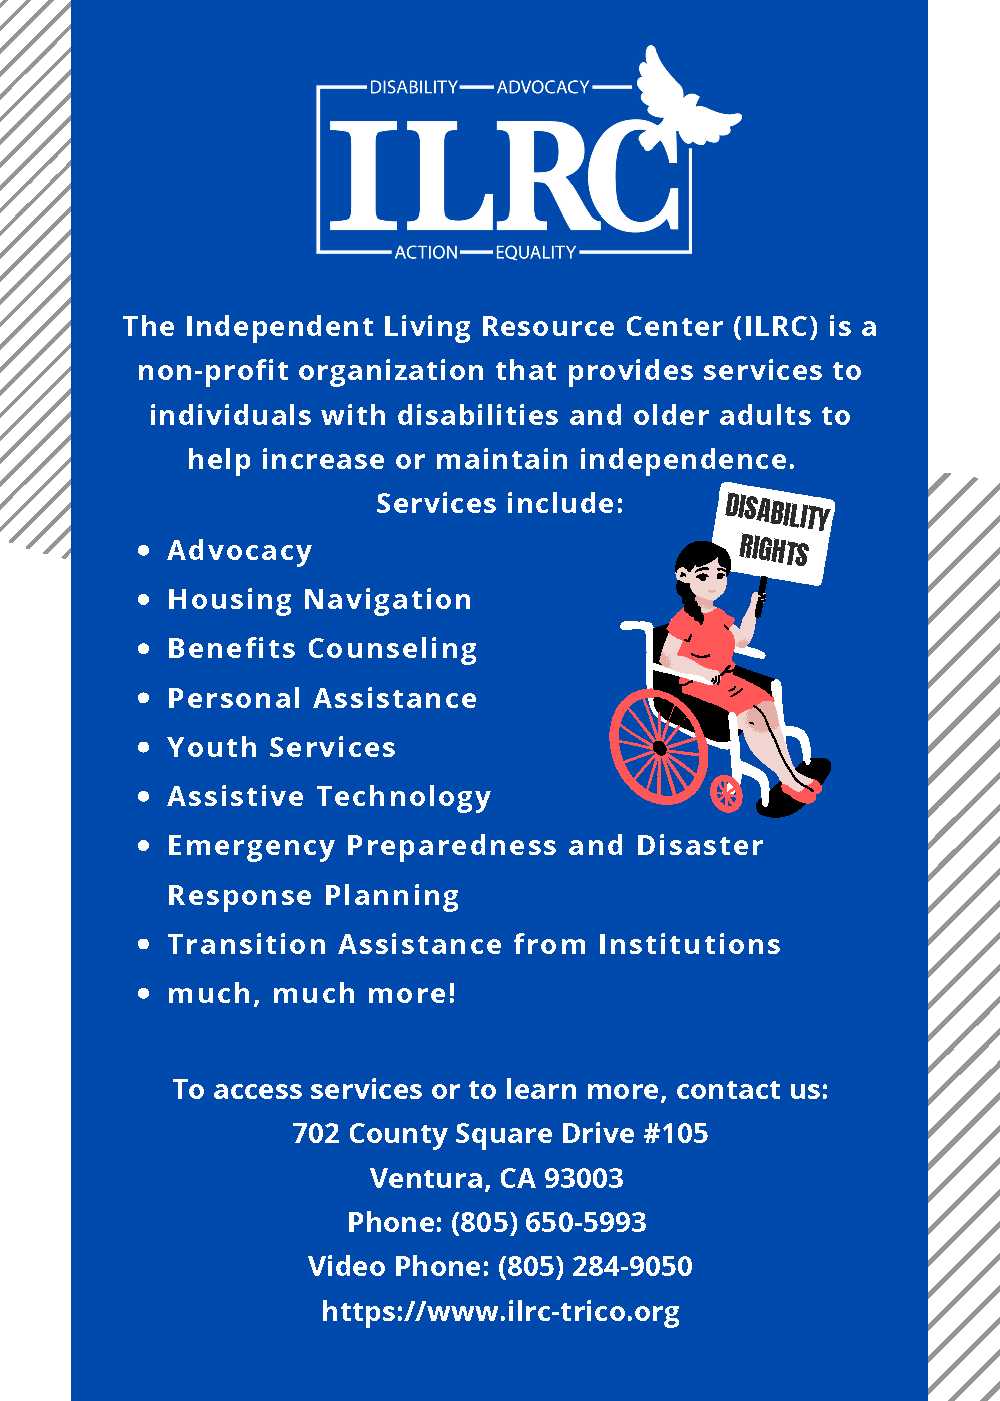 The Independent Living Resource Center (ILRC) is a non-profit organization that provides services to individuals with disabilities and older adults to help increase or maintain independence. To access services or learn more, contact us at 702 County Square Drive #105, Ventura. Phone 805-650-5993. Video phone 805-284-9050. Website: www.ilrc-trico.org.